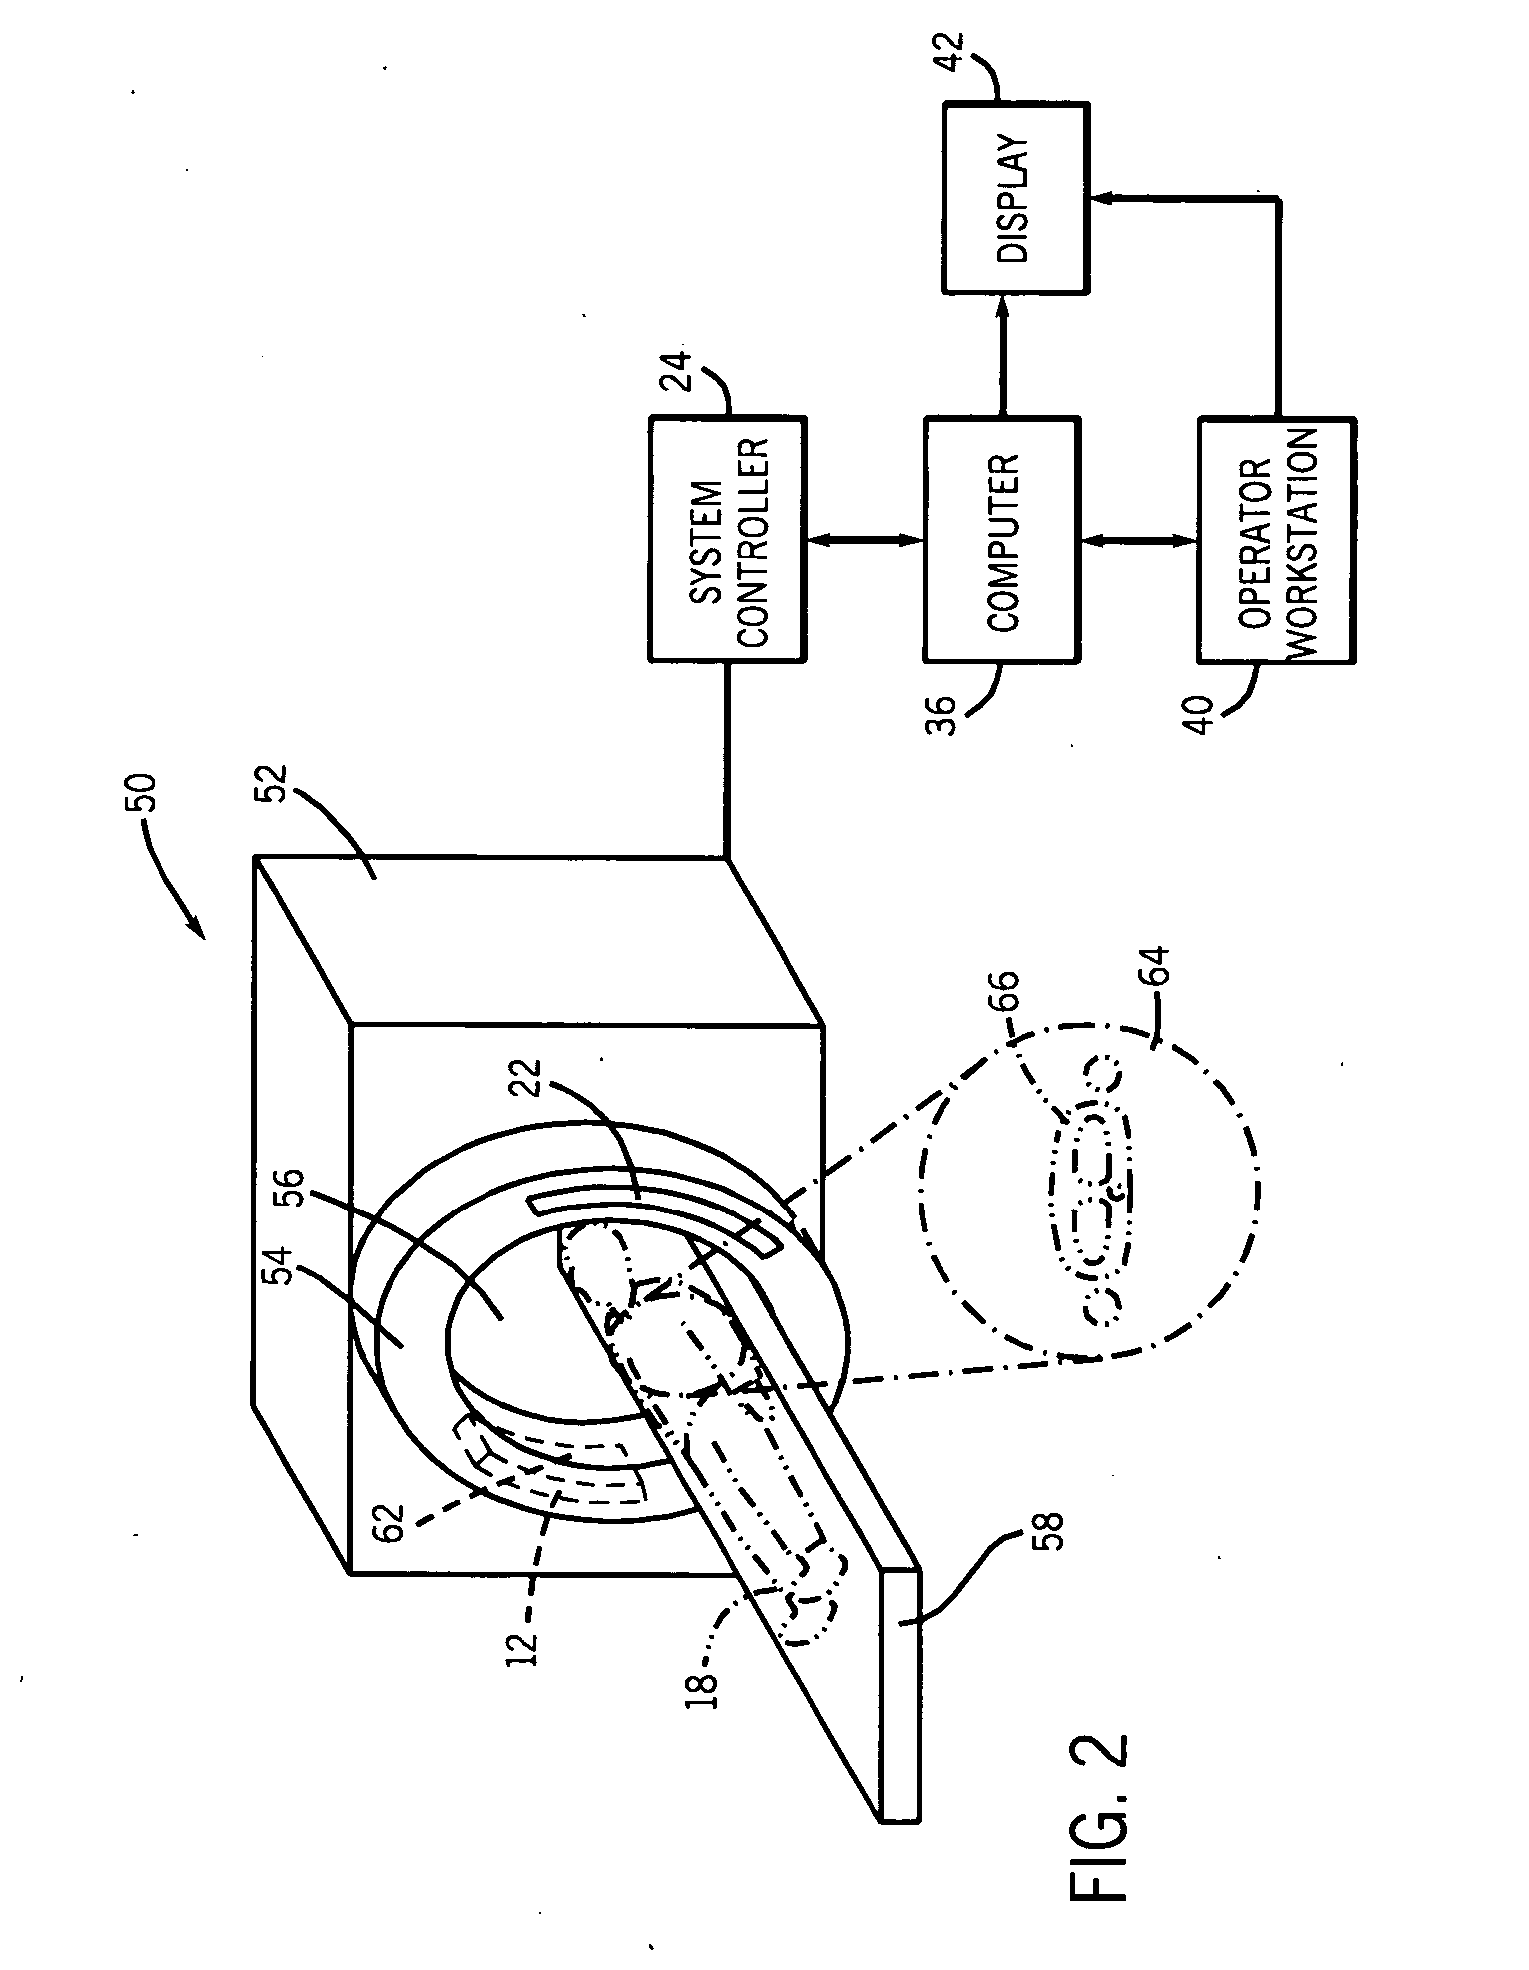 Method and apparatus for segmenting structure in CT angiography